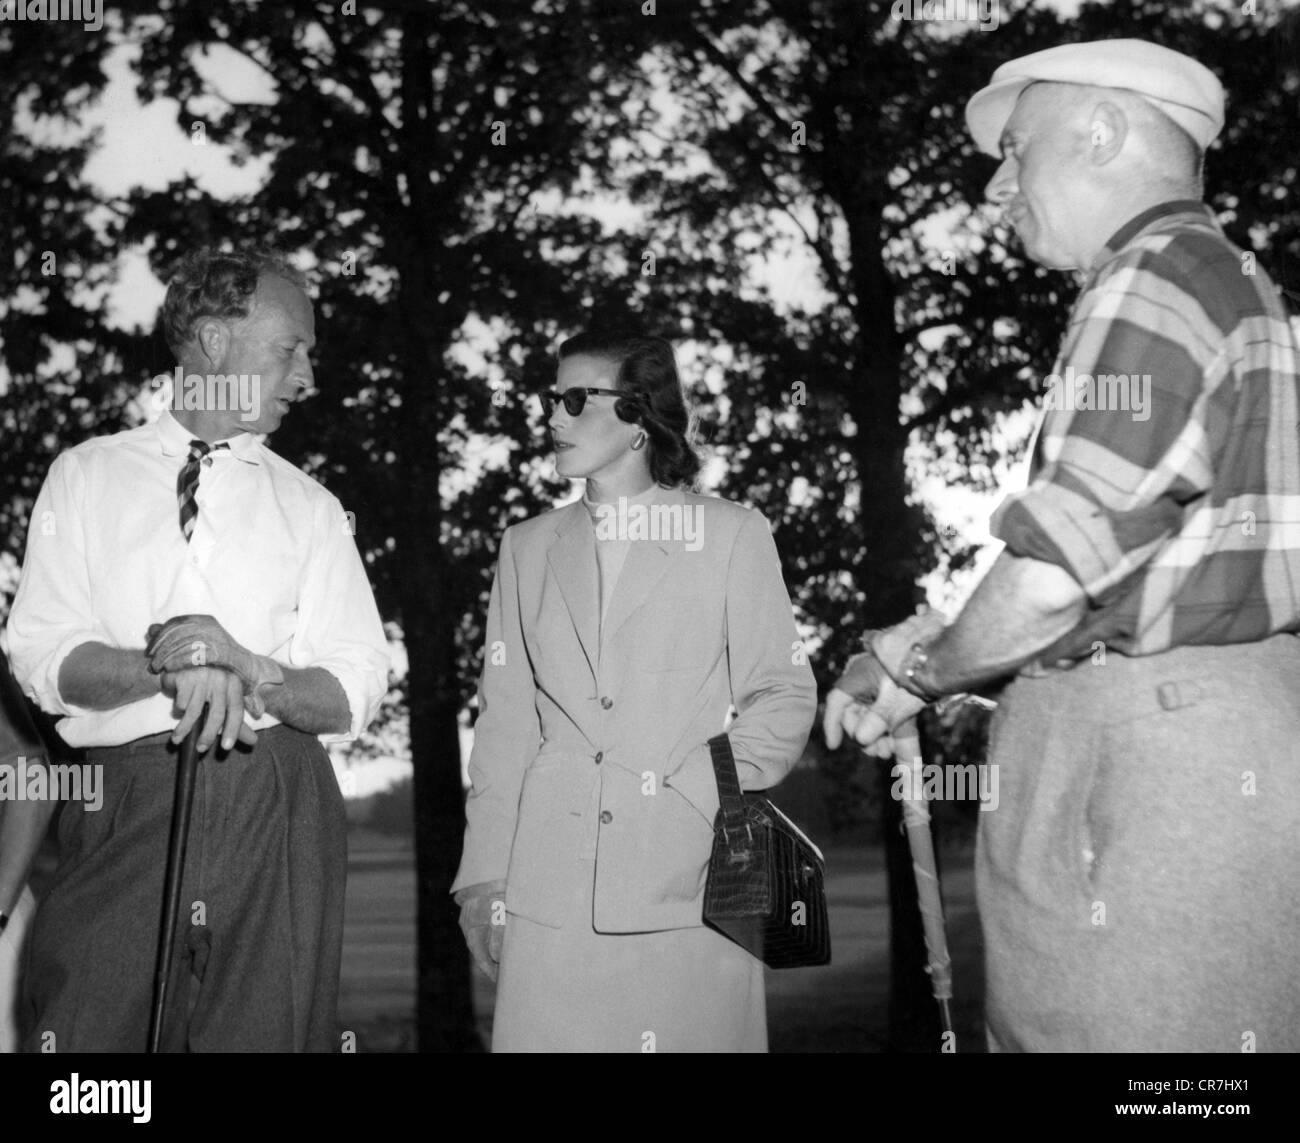 Leopold III, 3.11.1901 - 25.9.1983, King of the Belgians 23.2.1934 - 16.7.1951, with wife Marie Lilian Princess de Rethy, 1950s, Stock Photo